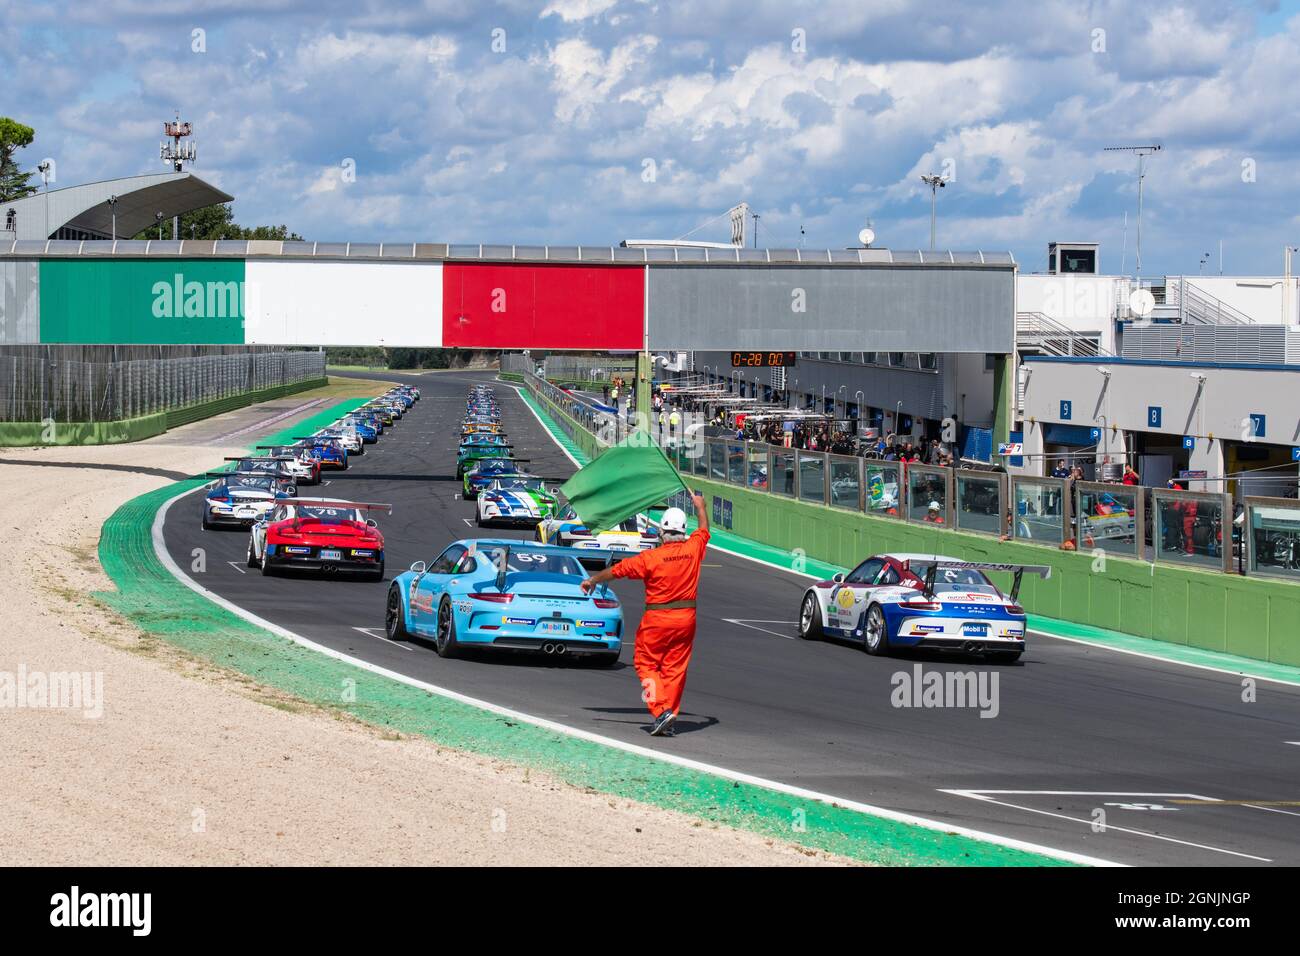 Vallelunga, italy september 19th 2021 Aci racing weekend. Green flag waving at car race starting grid rear view Porsche Carrera Cup Stock Photo